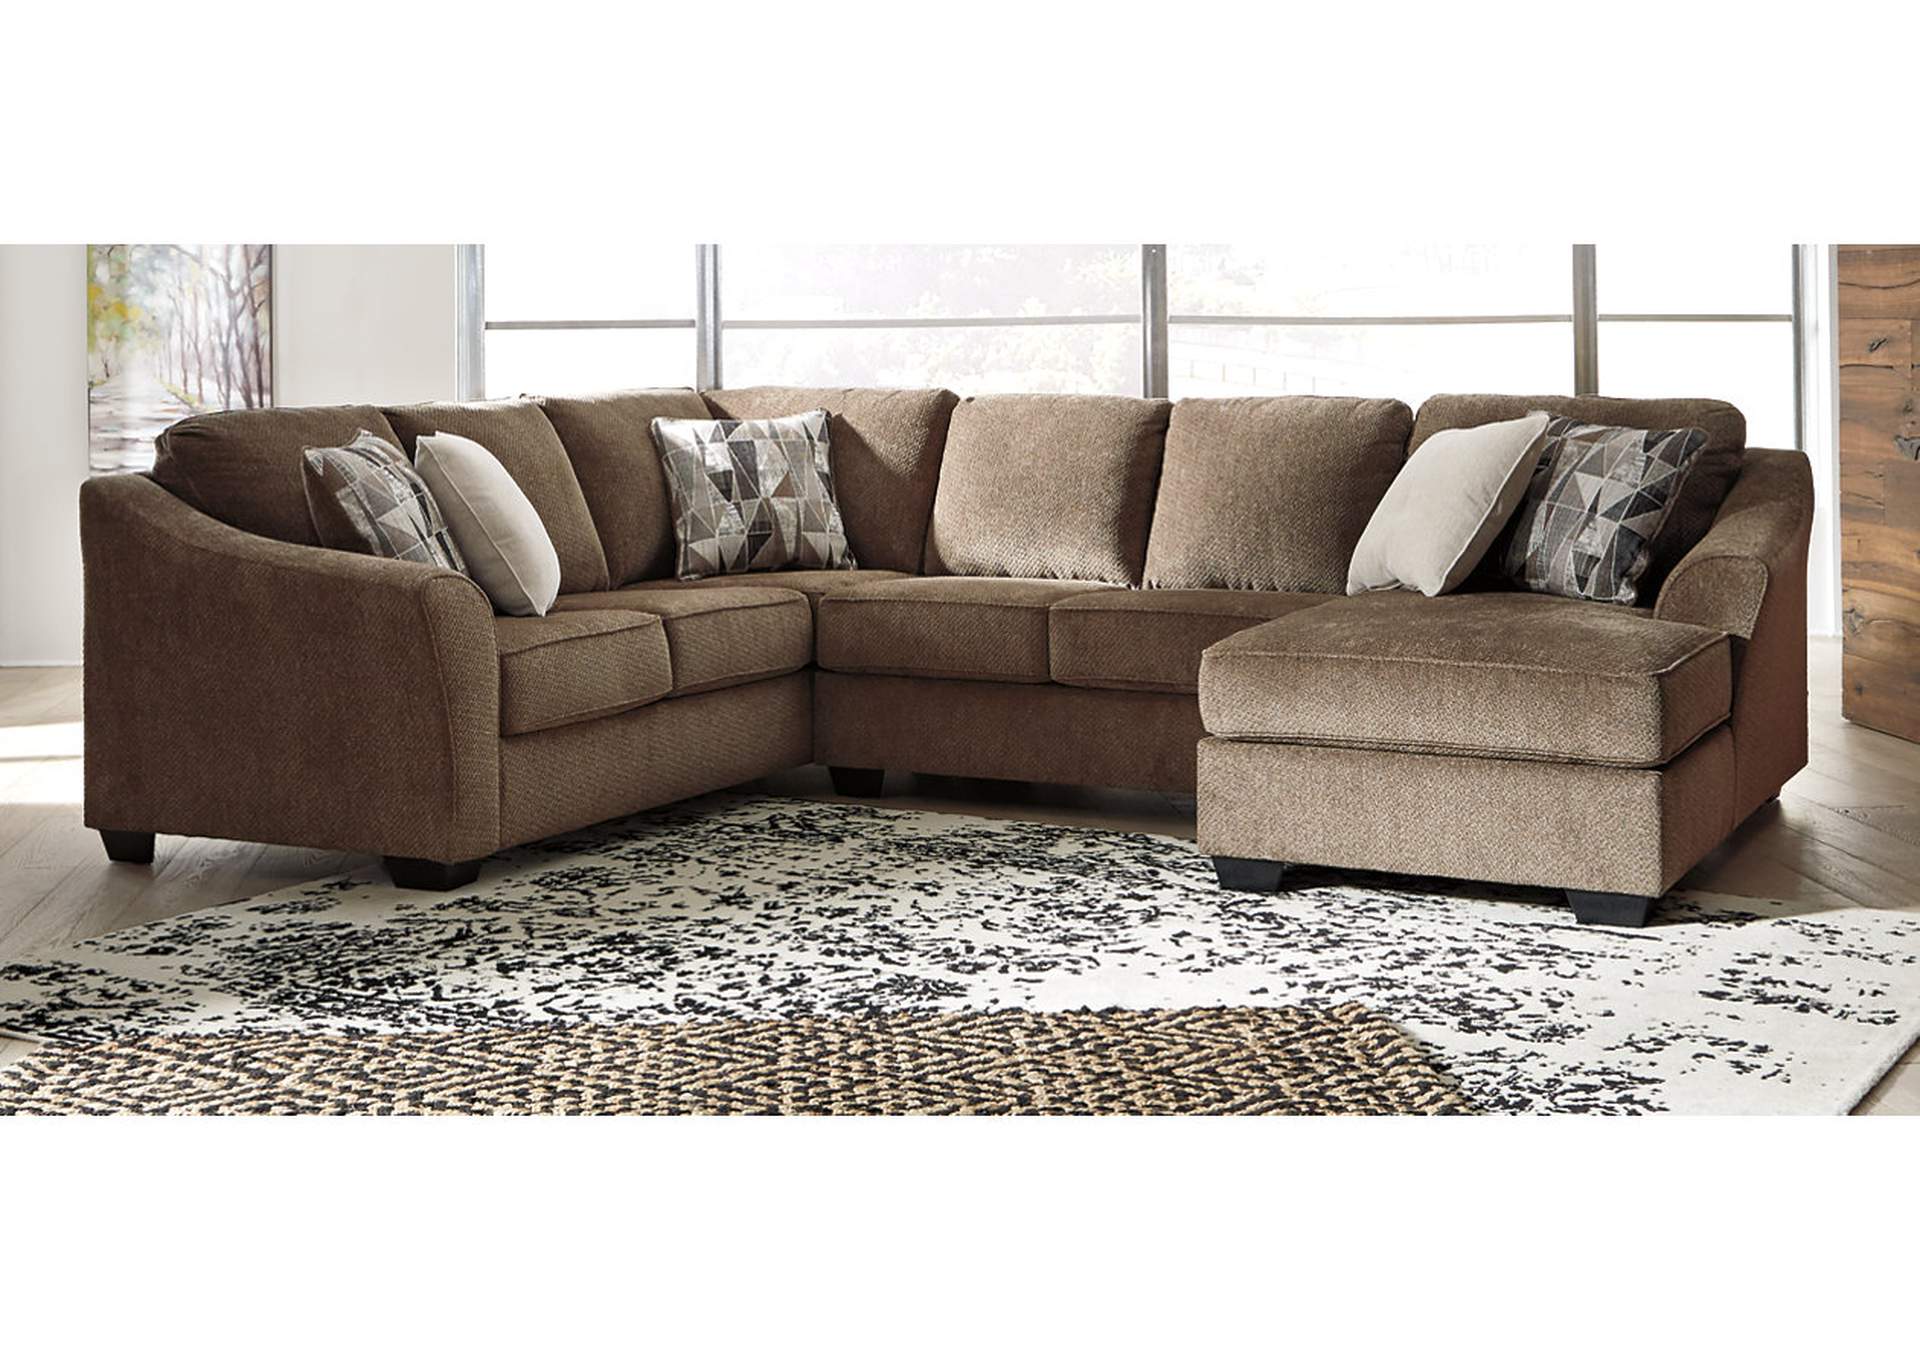 Graftin 3-Piece Sectional with Chaise,Benchcraft